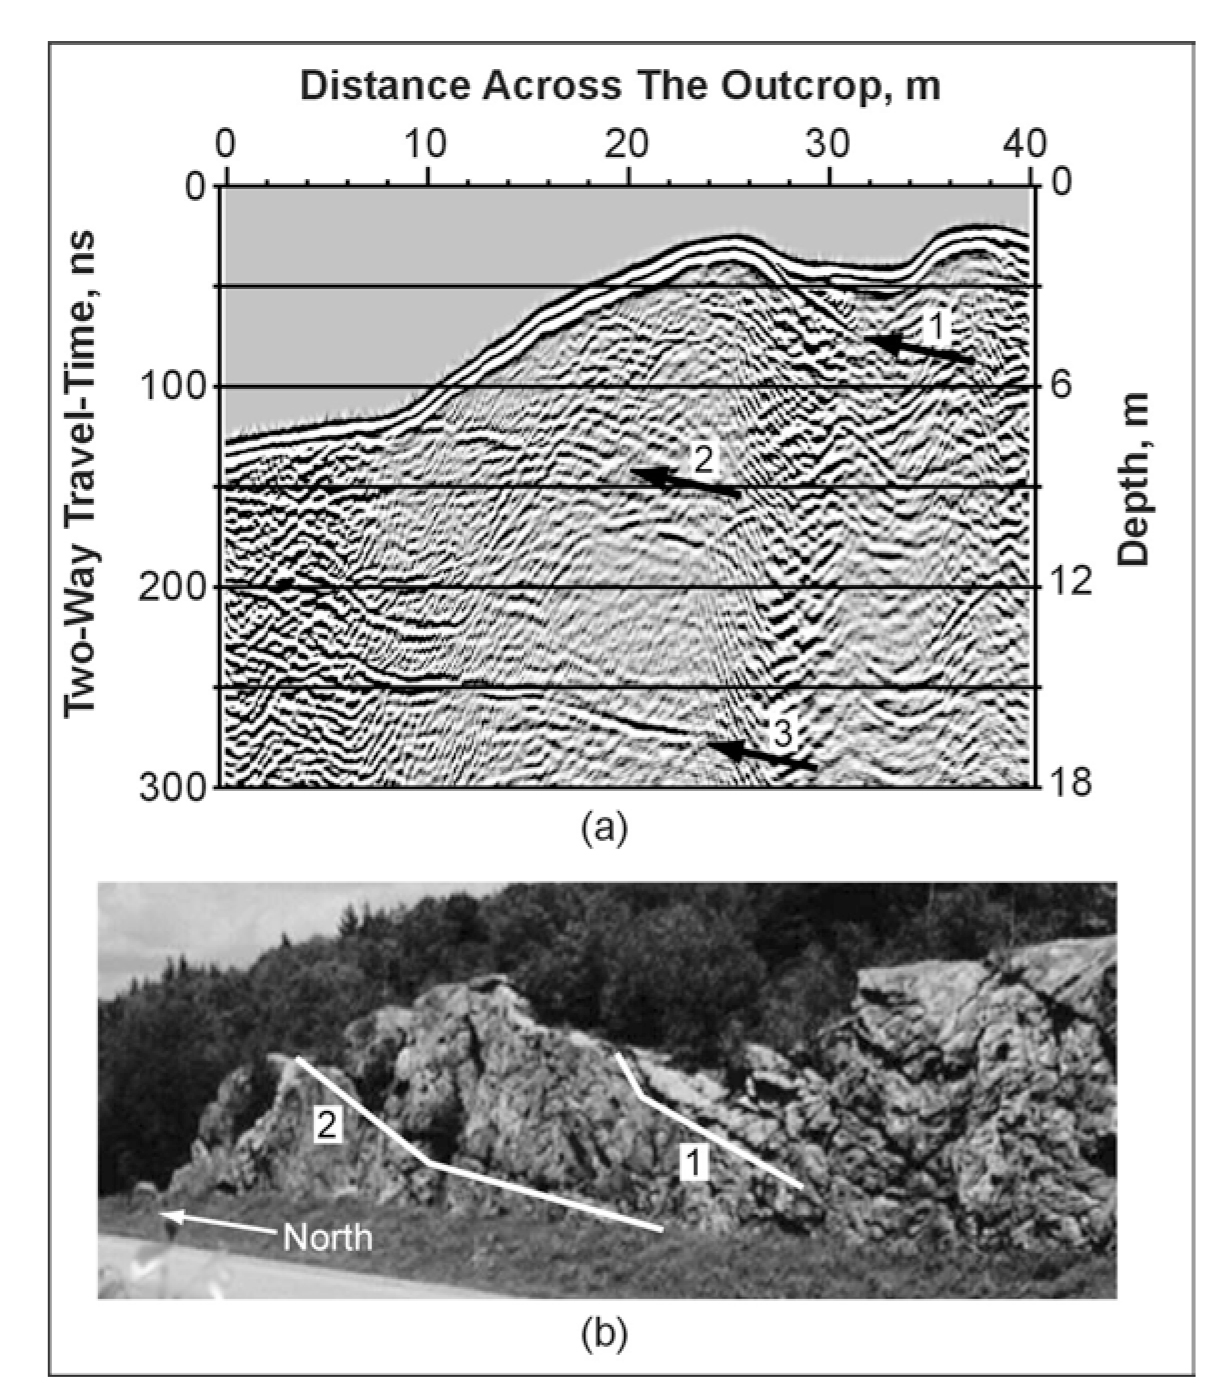 Ground Penetrating Radar data illustrating a section over a fracture zone.  (Lane, 2000).